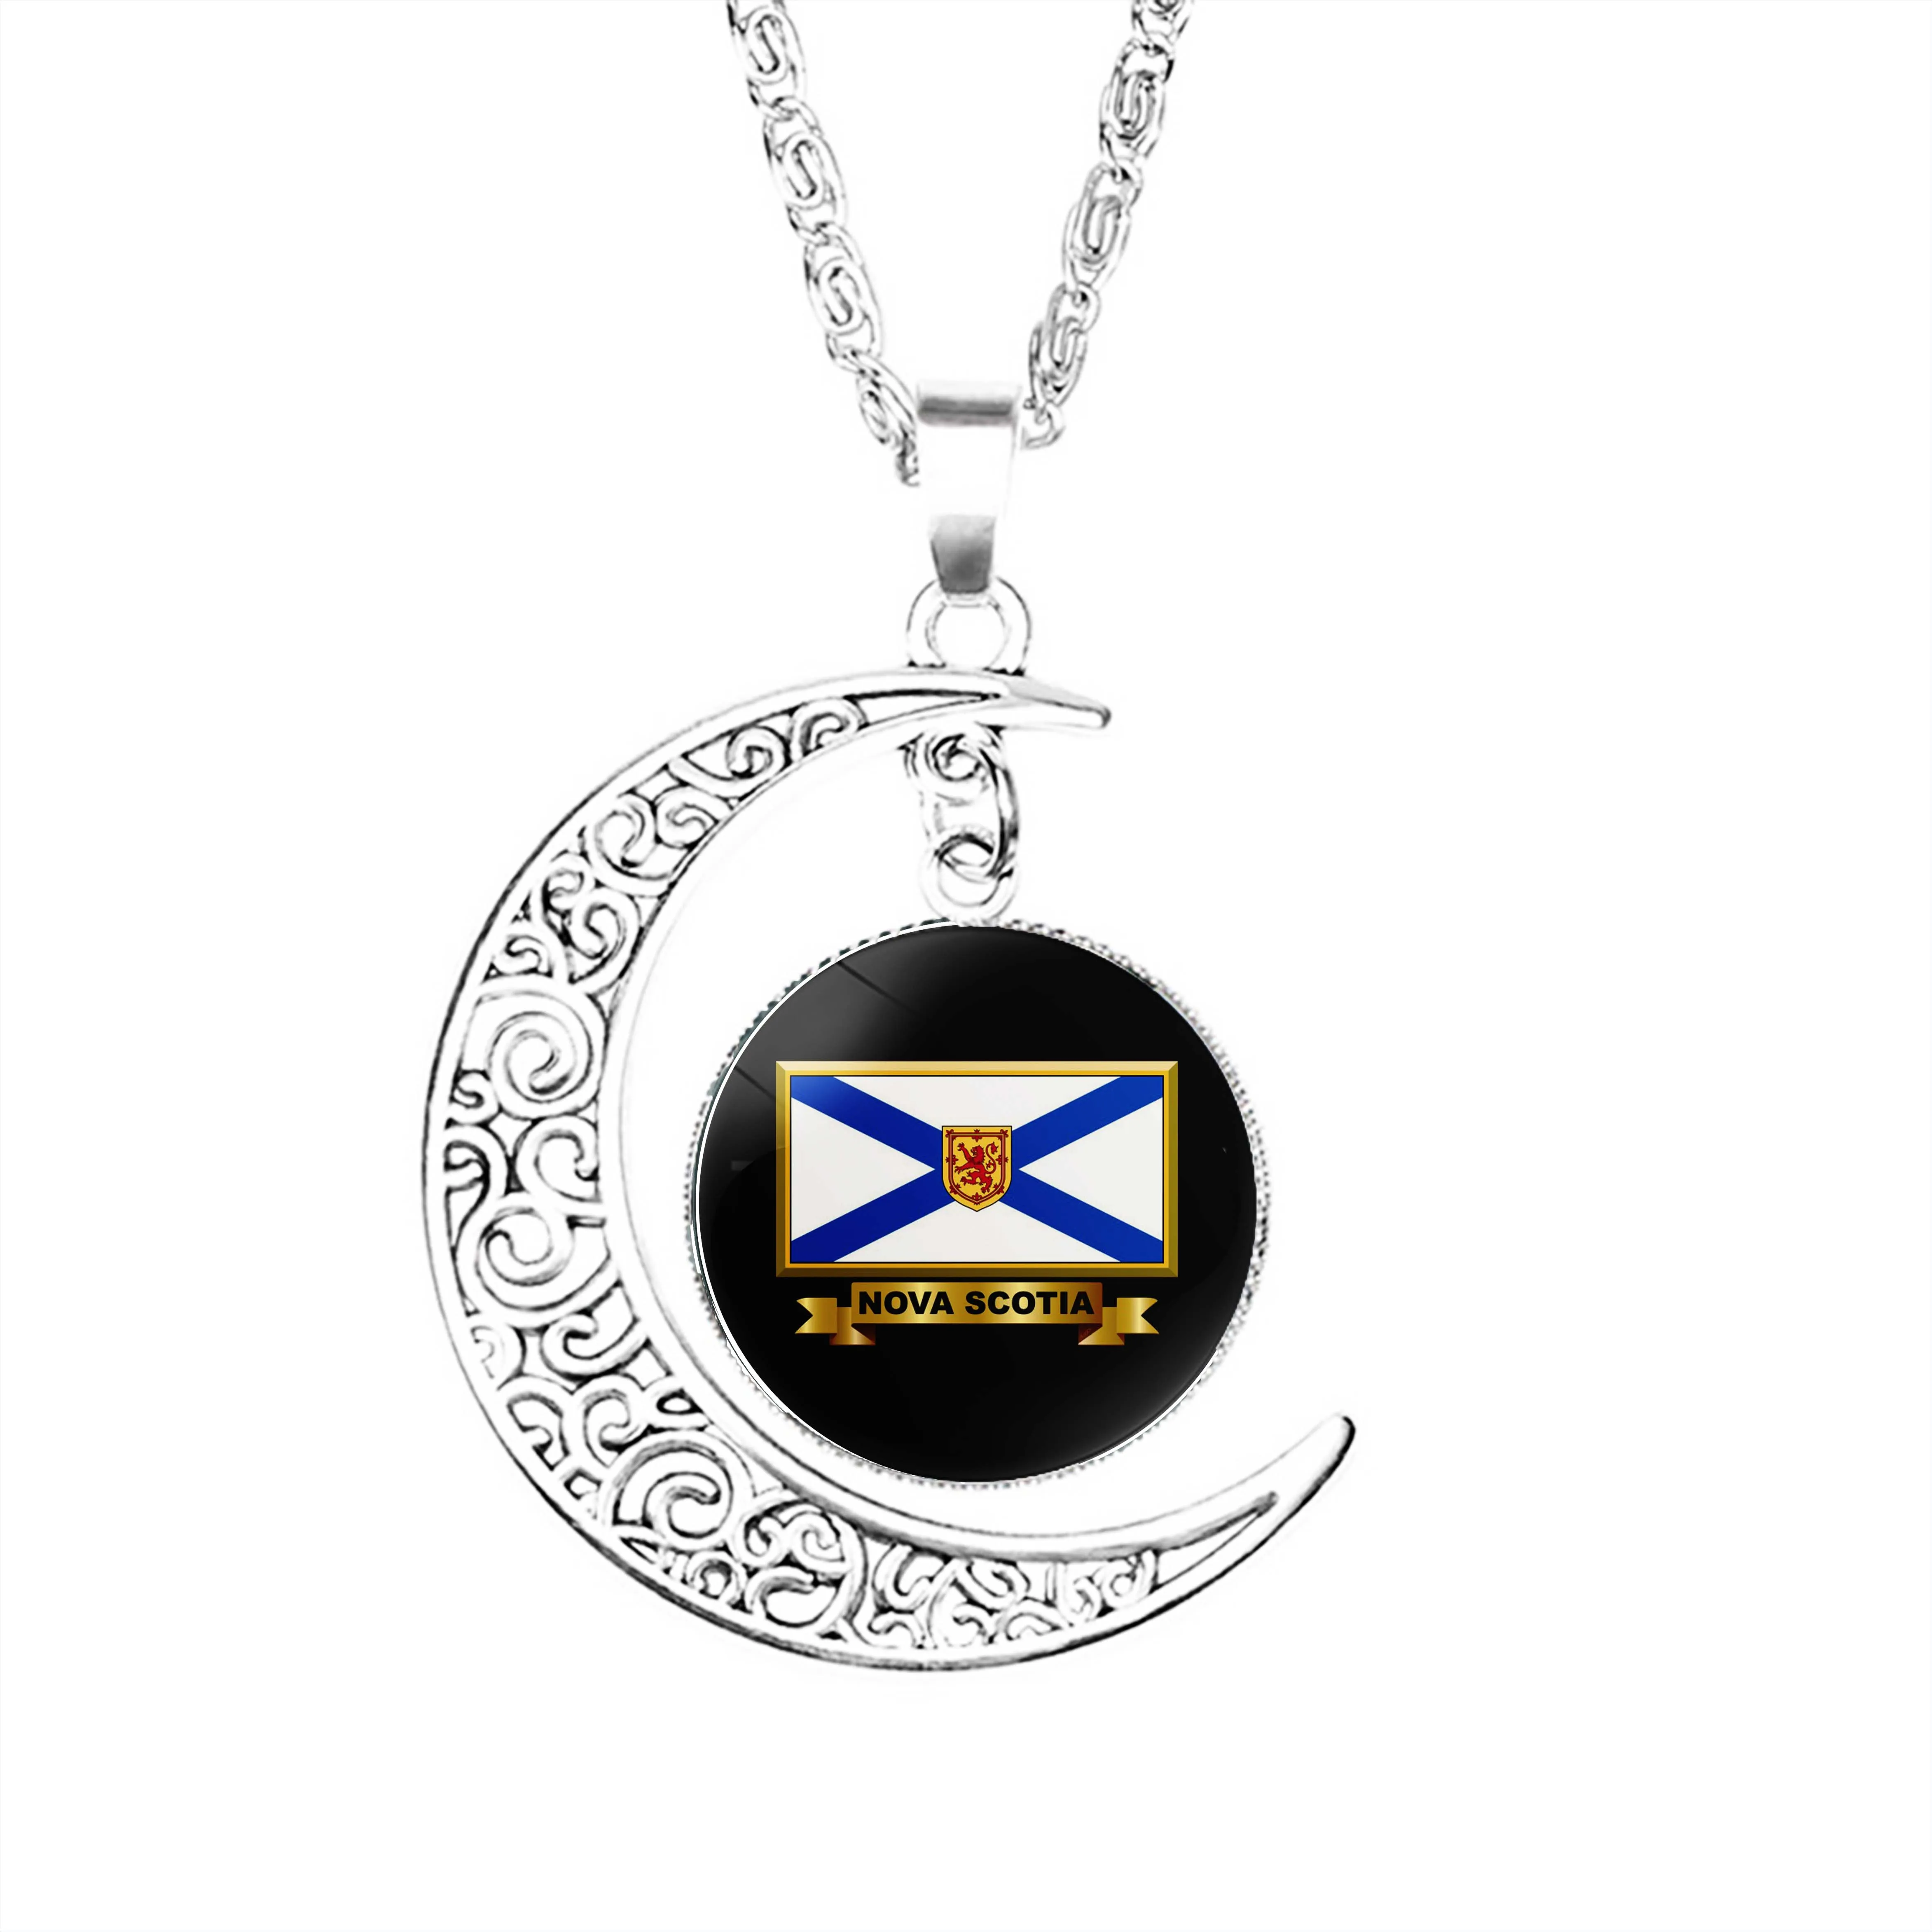 Nova Scotia Flag Gifts Masks Products N  Moon Necklace Girls Jewelry Lady Pendant Glass Men Fashion Dome Women Chain Boy